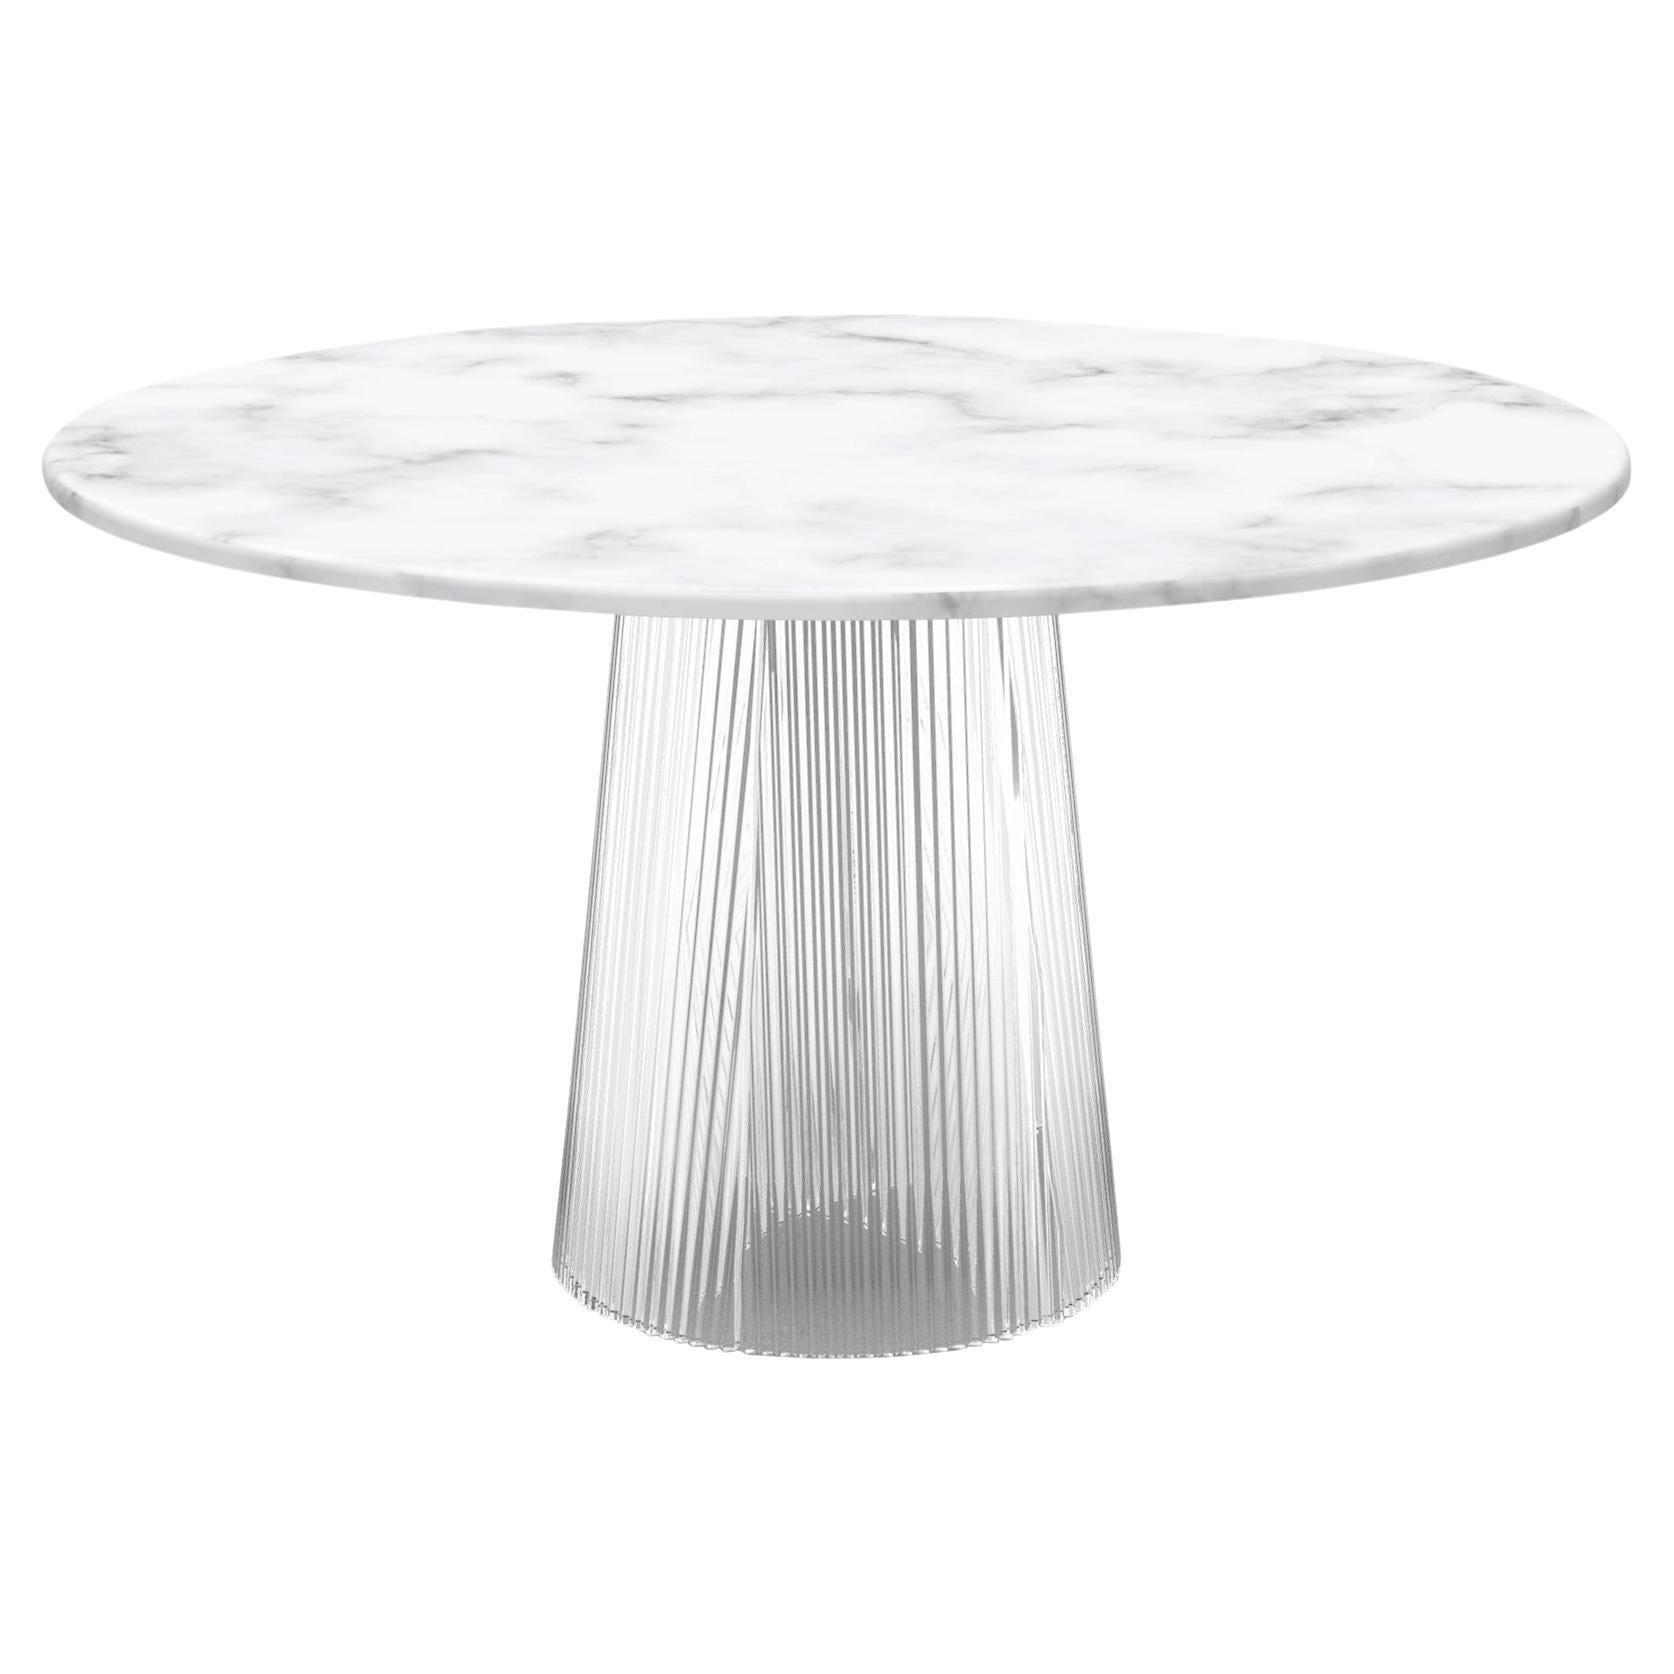 Bent Dining Table Medium White Transparent by Pulpo